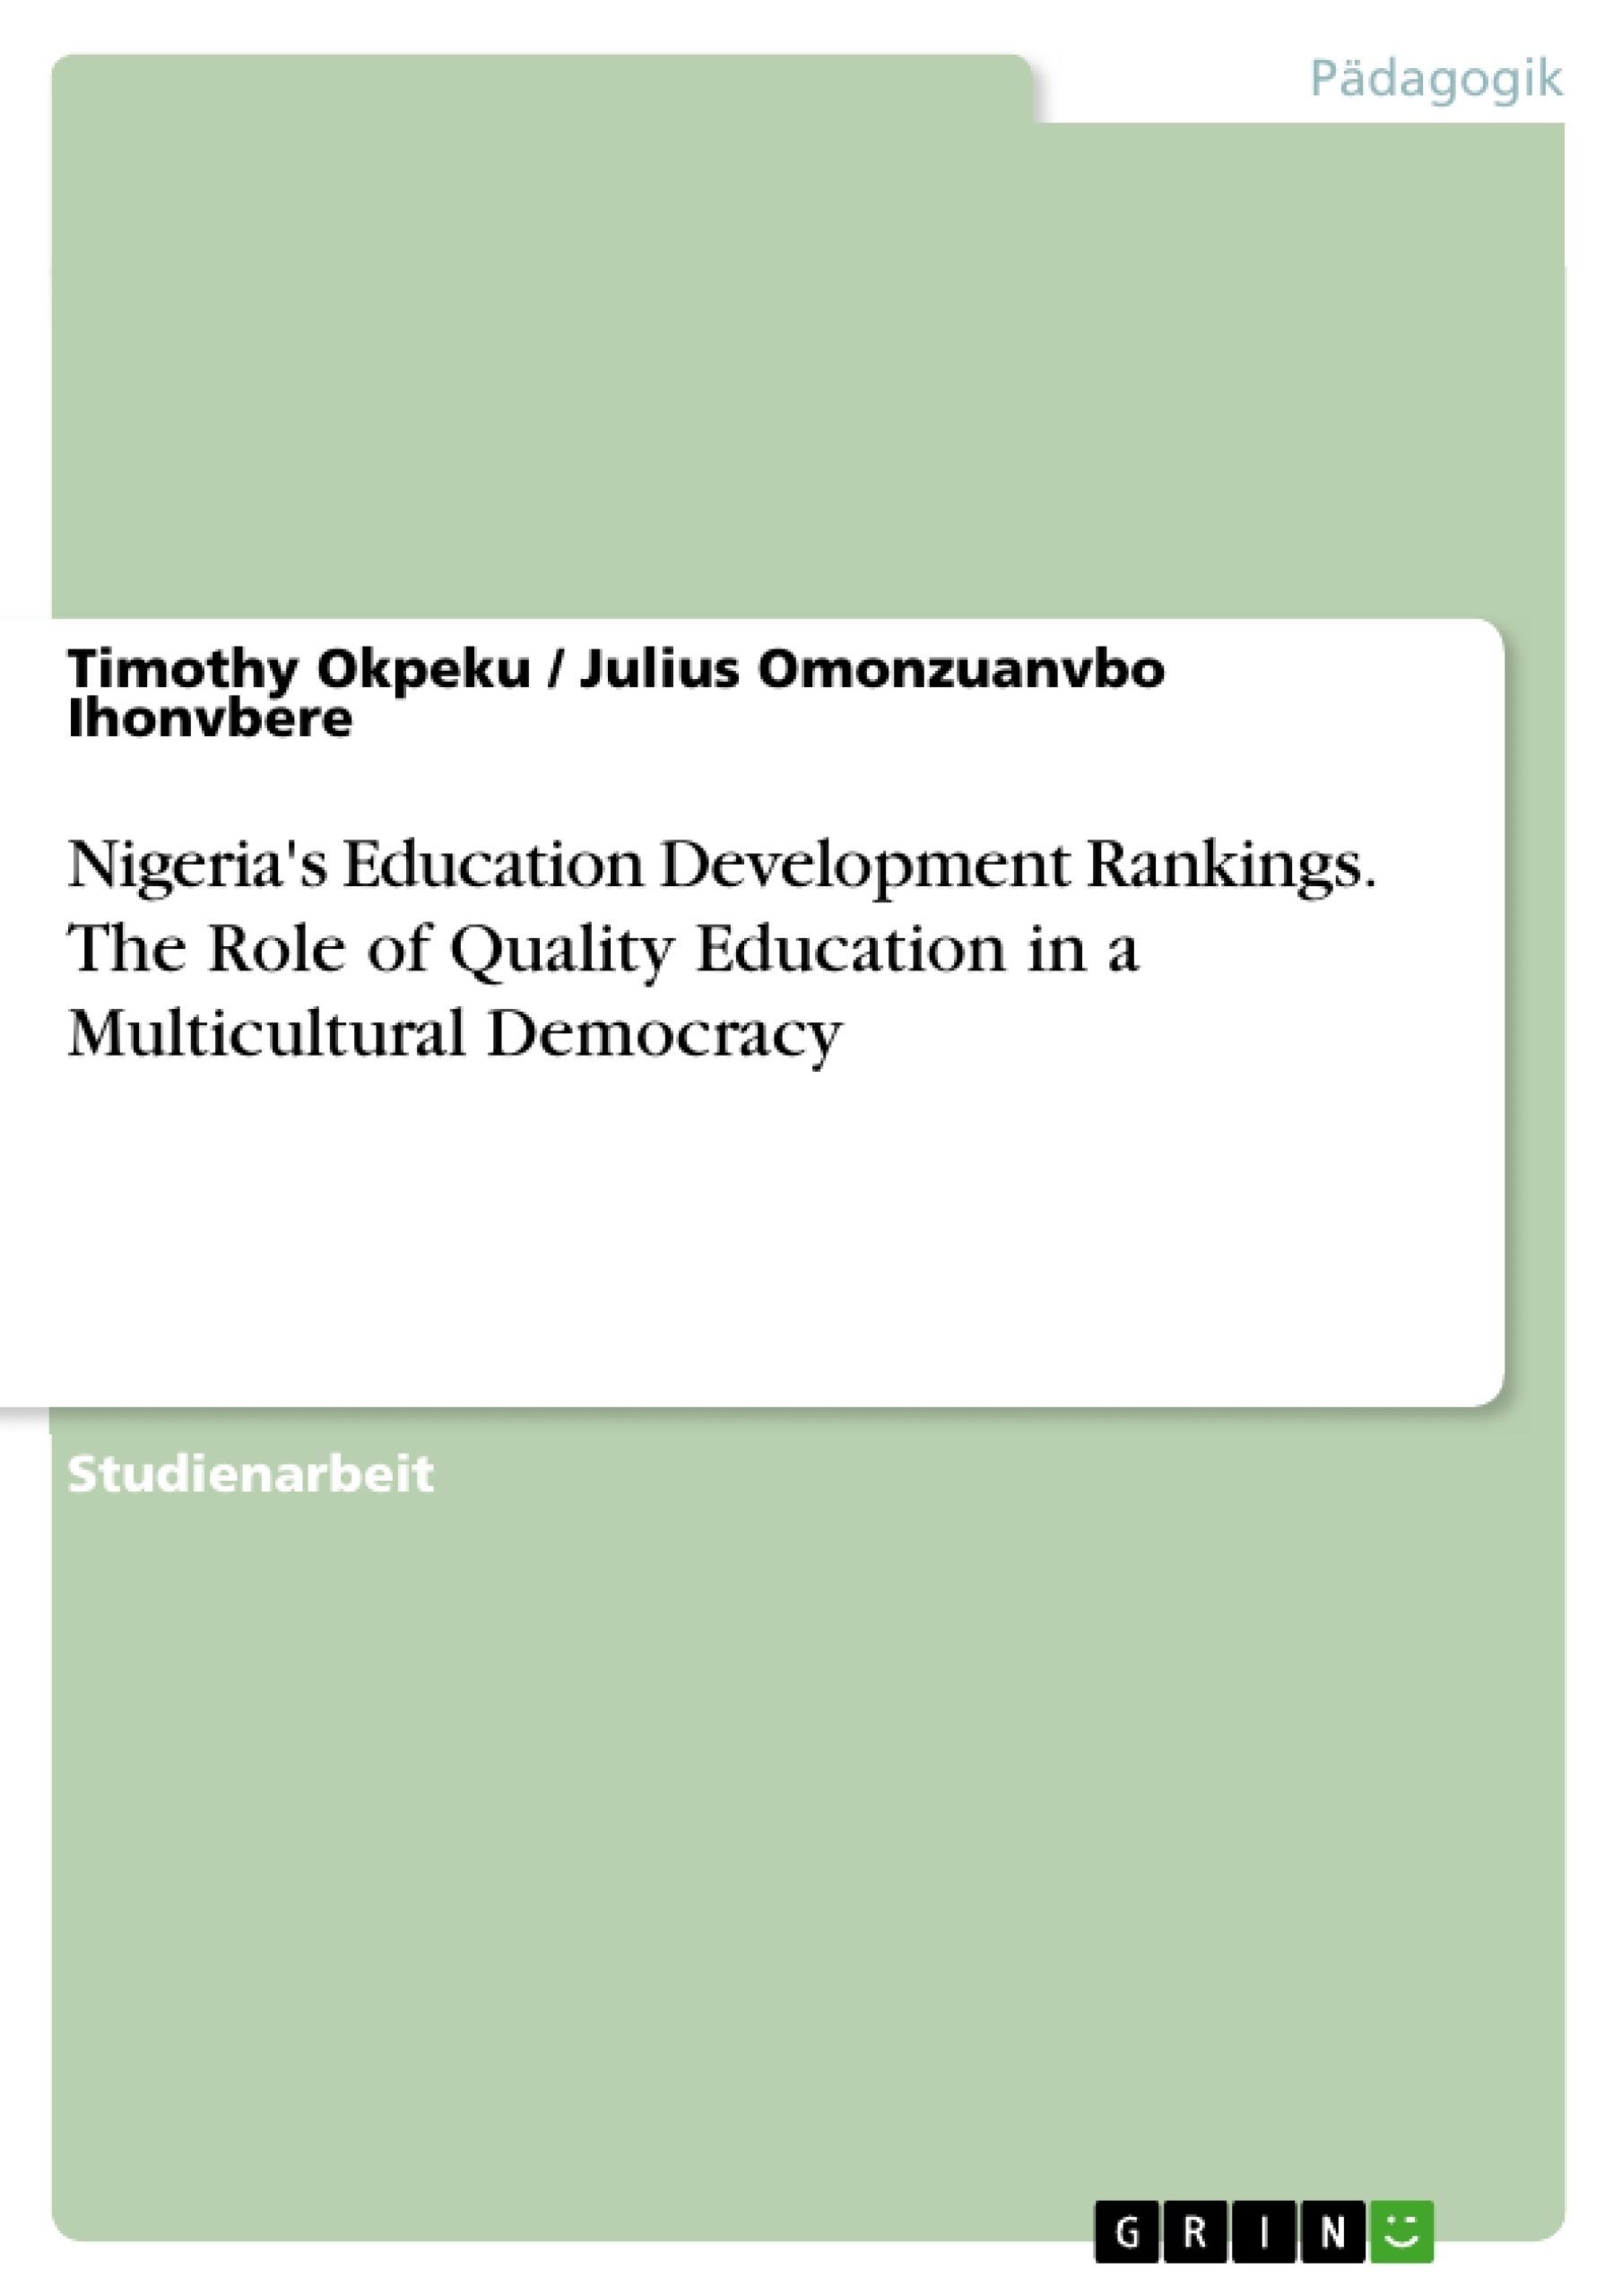 Titel: Nigeria's Education Development Rankings. The Role of Quality Education in a Multicultural Democracy